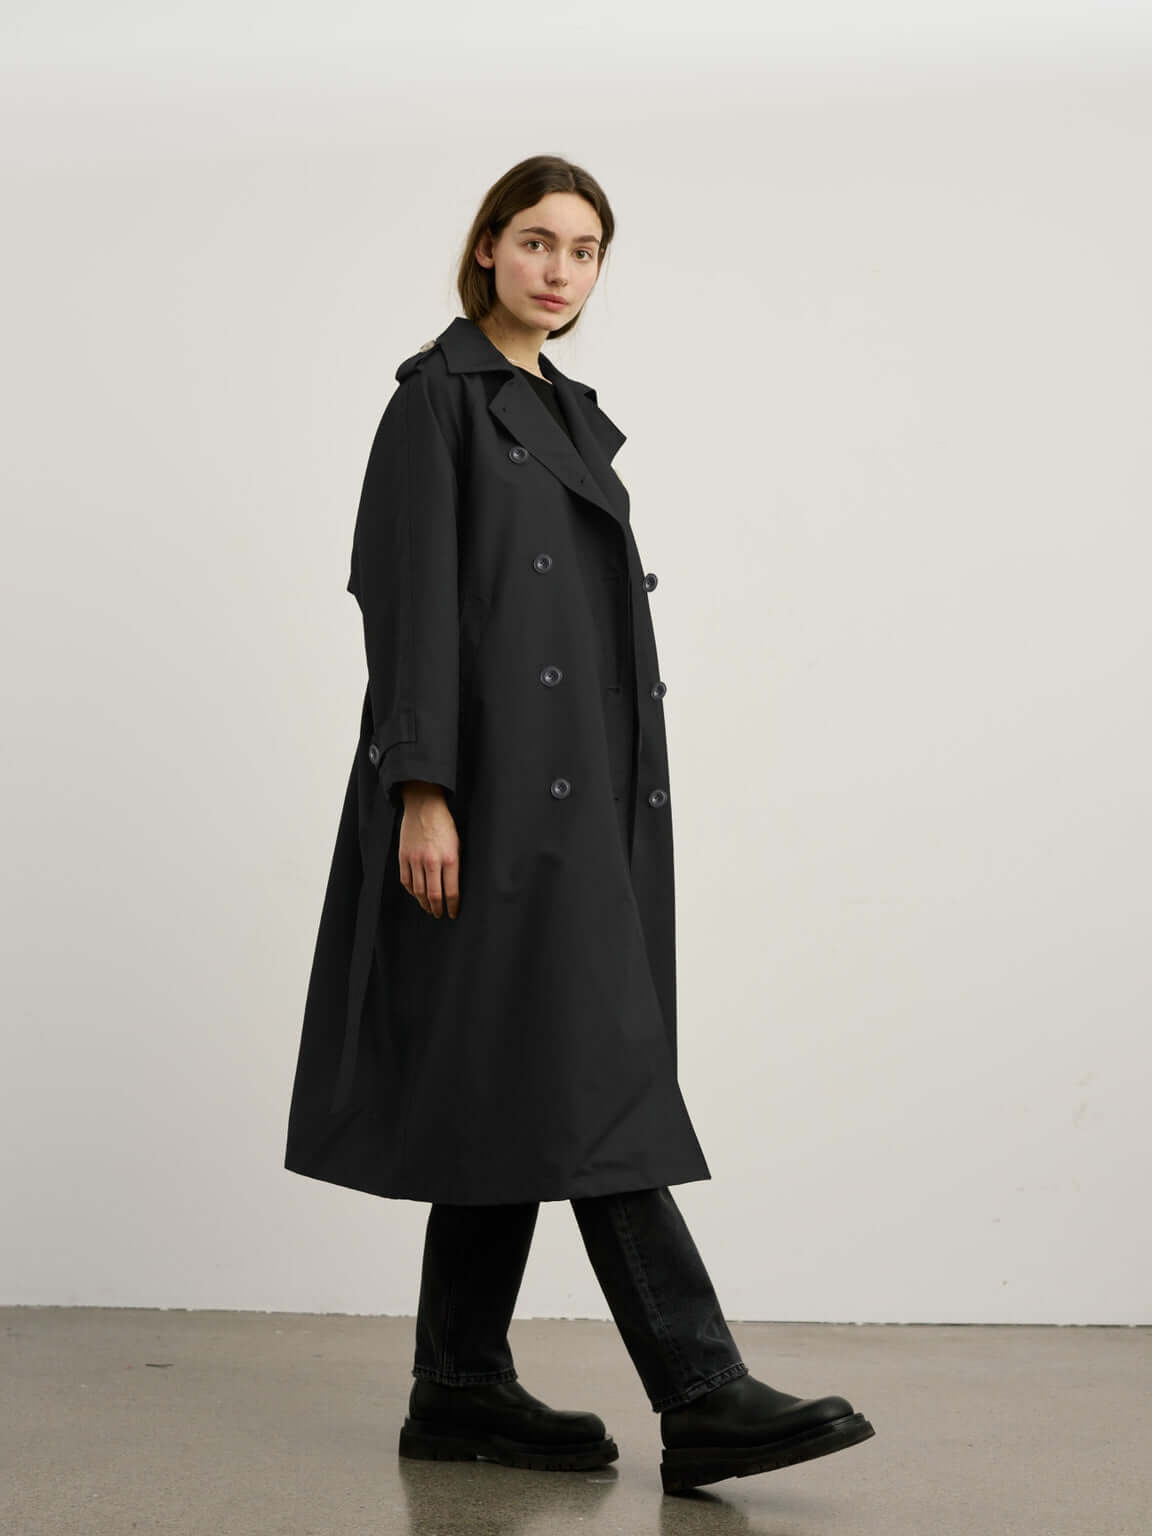 Meotine Cassandra Trench Coat in Black available at TNT The New Trend Australia. Free shipping on orders over $300 AUD.